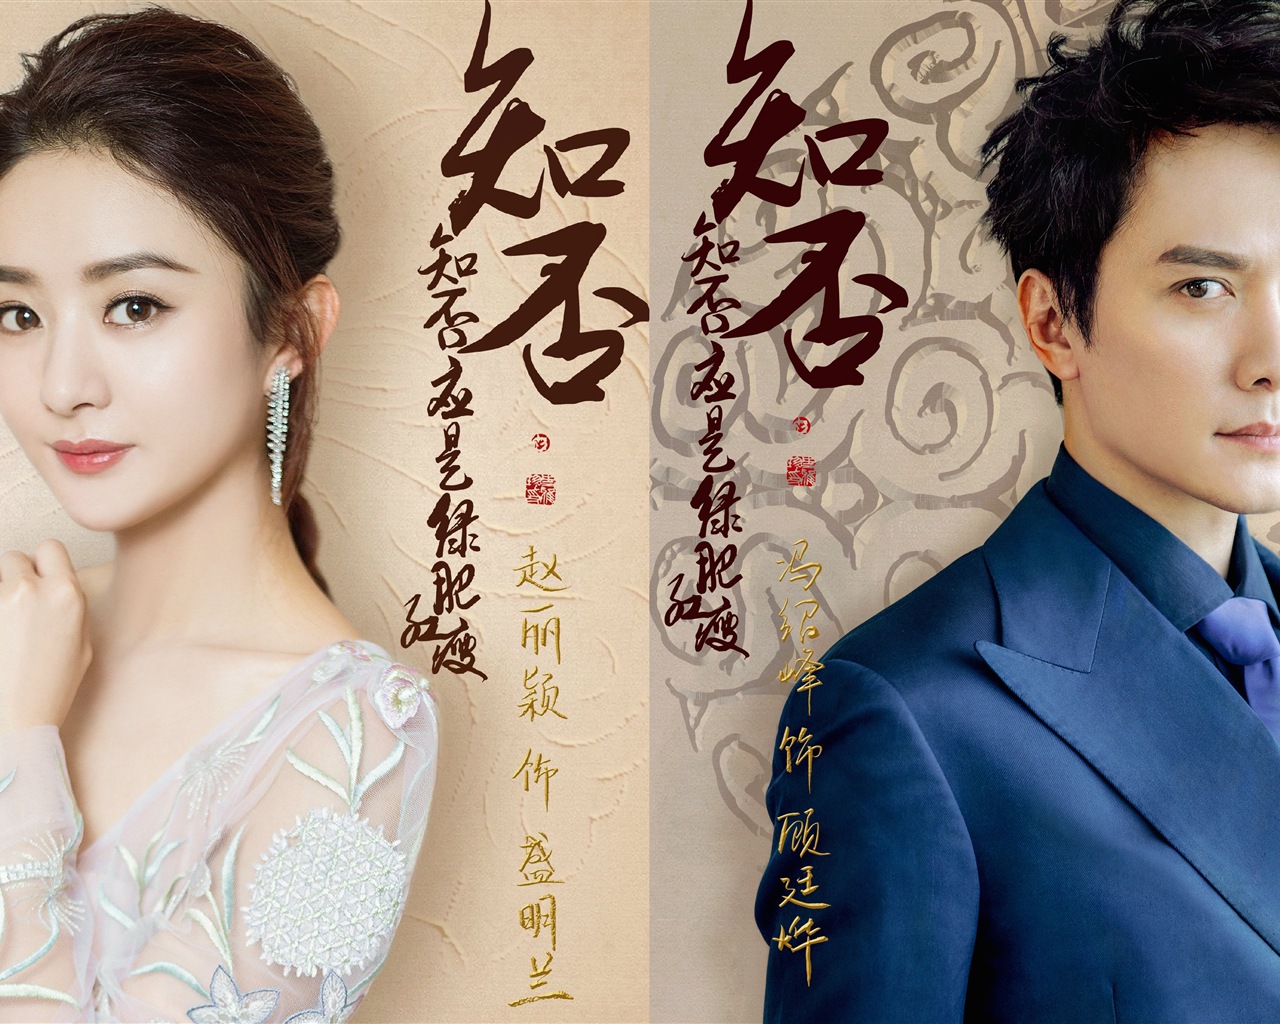 The Story Of MingLan, TV series HD wallpapers #46 - 1280x1024